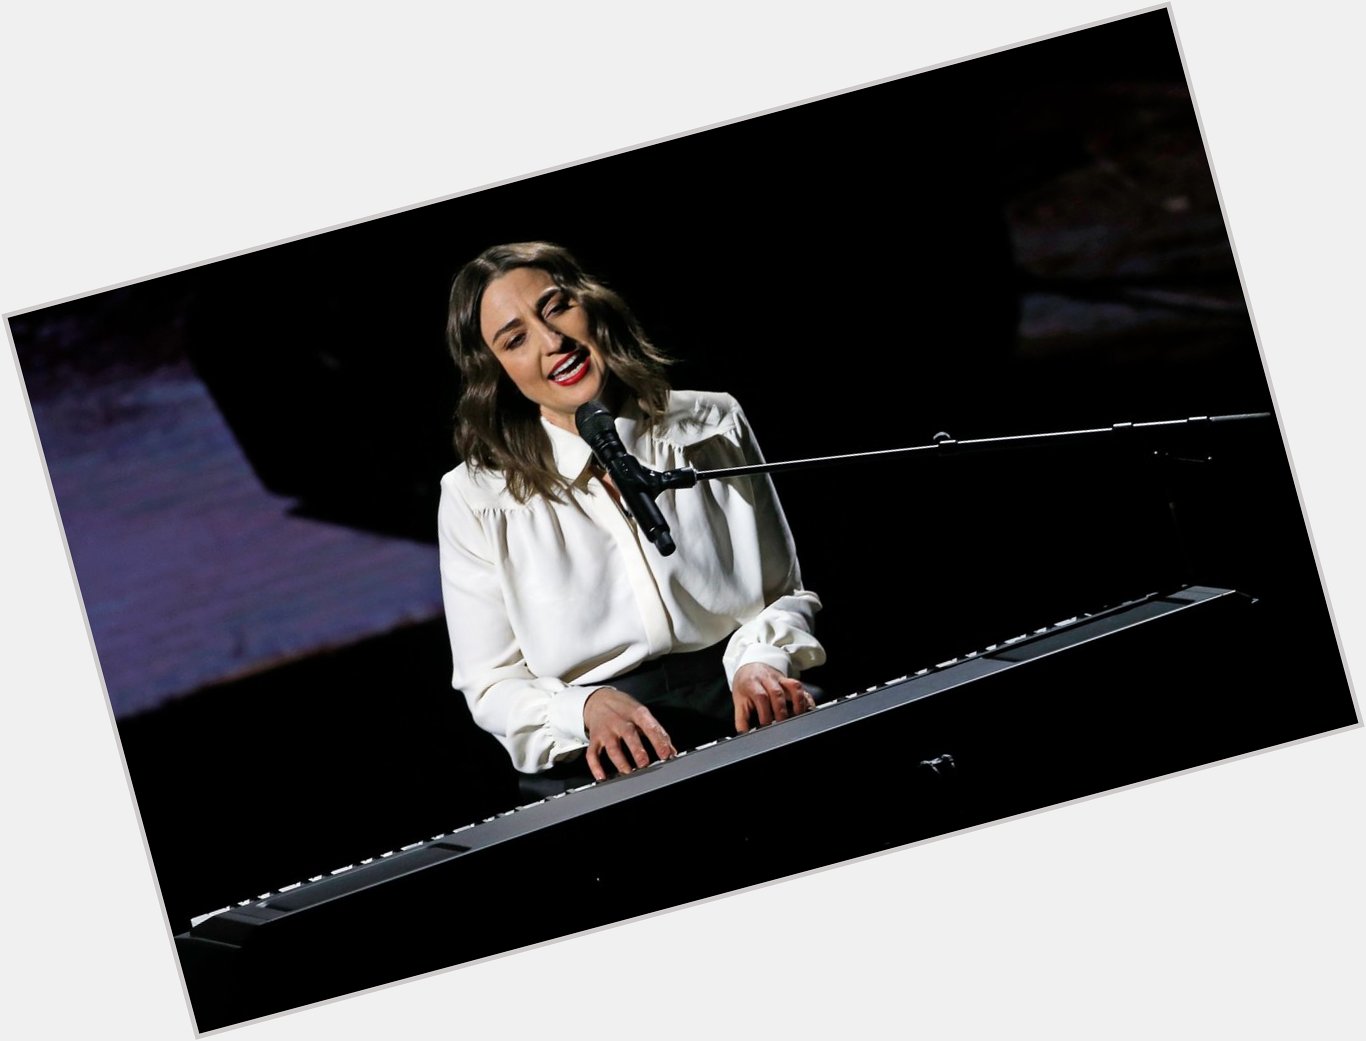 Huge happy birthday shoutout to the crazy-talented Sara Bareilles! (Reuters) 